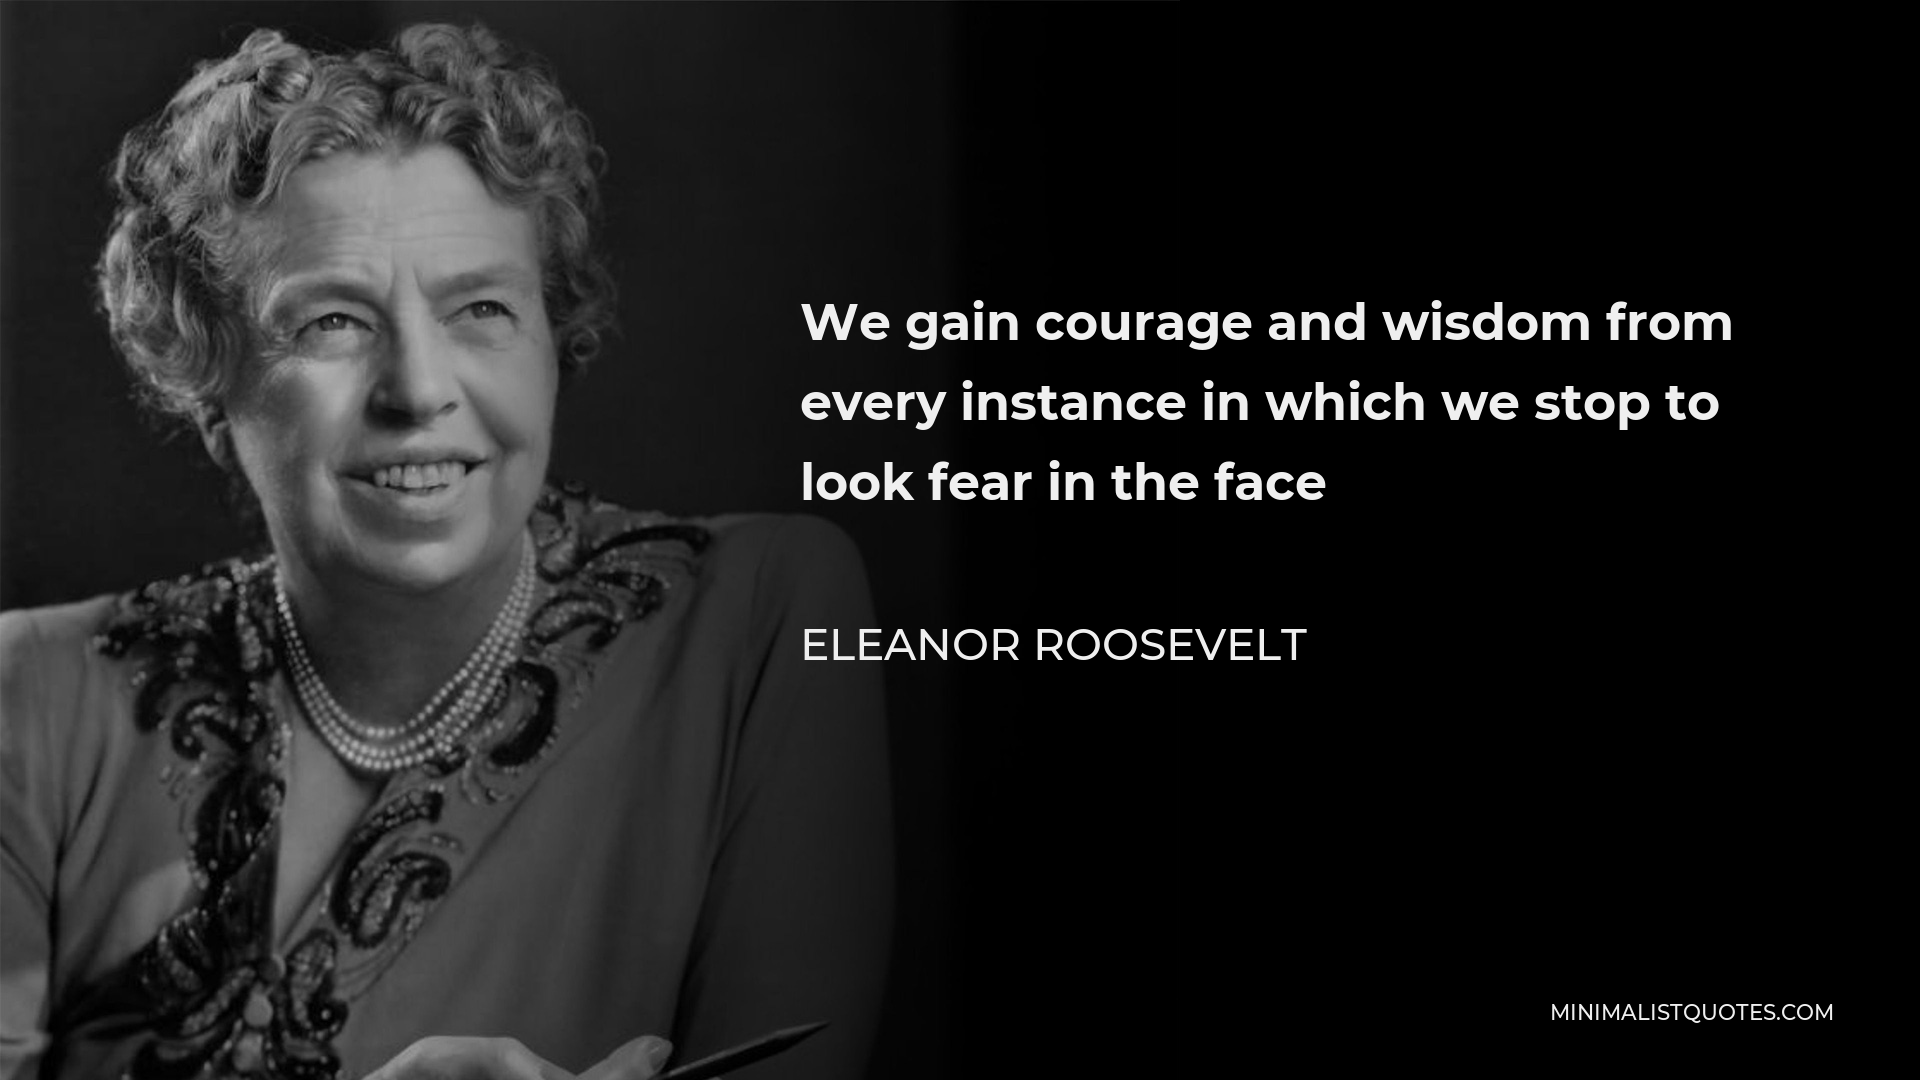 Eleanor Roosevelt Quote - We gain courage and wisdom from every instance in which we stop to look fear in the face